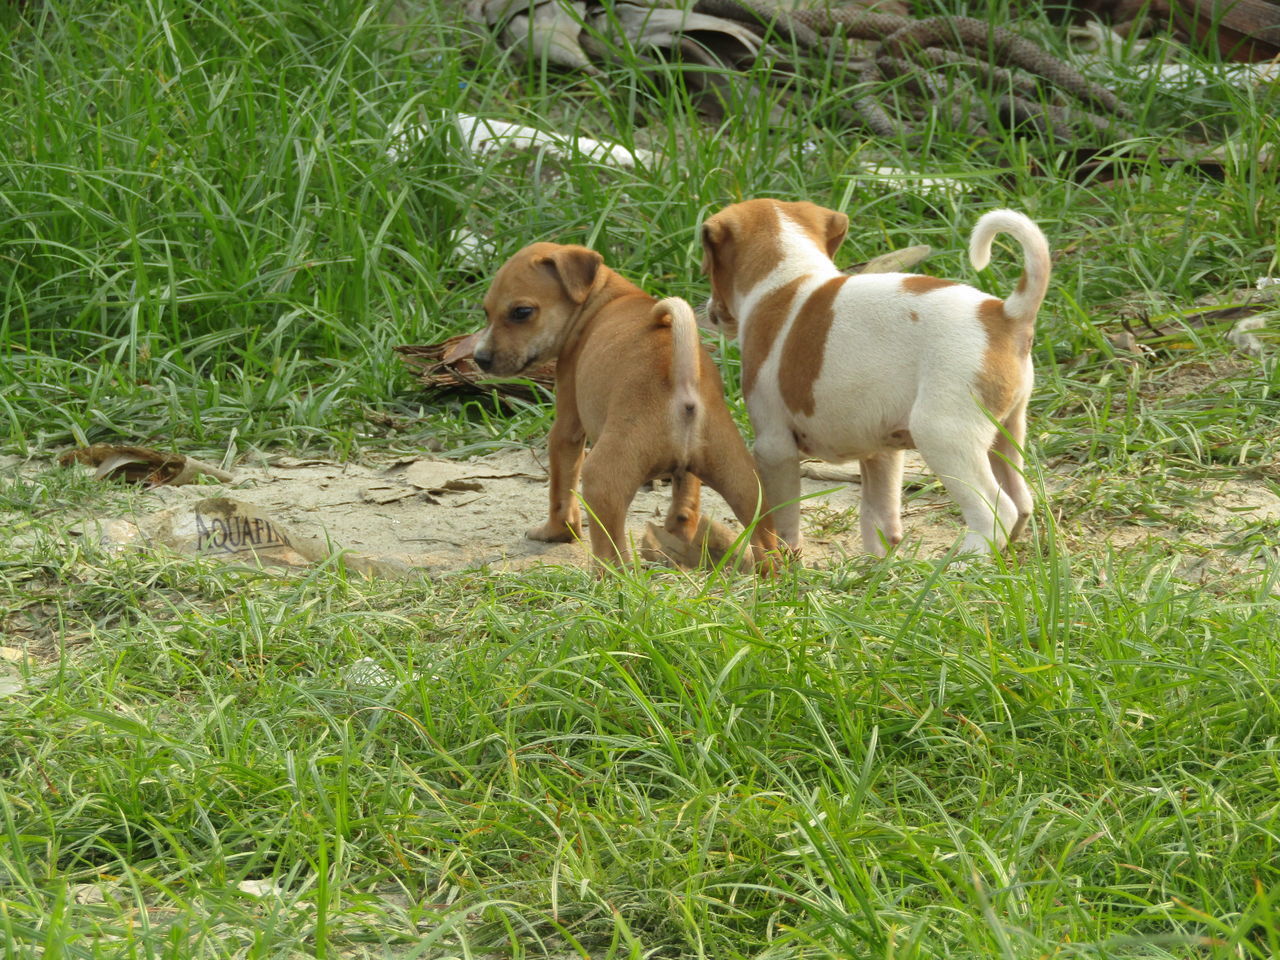 VIEW OF TWO DOGS ON GRASS